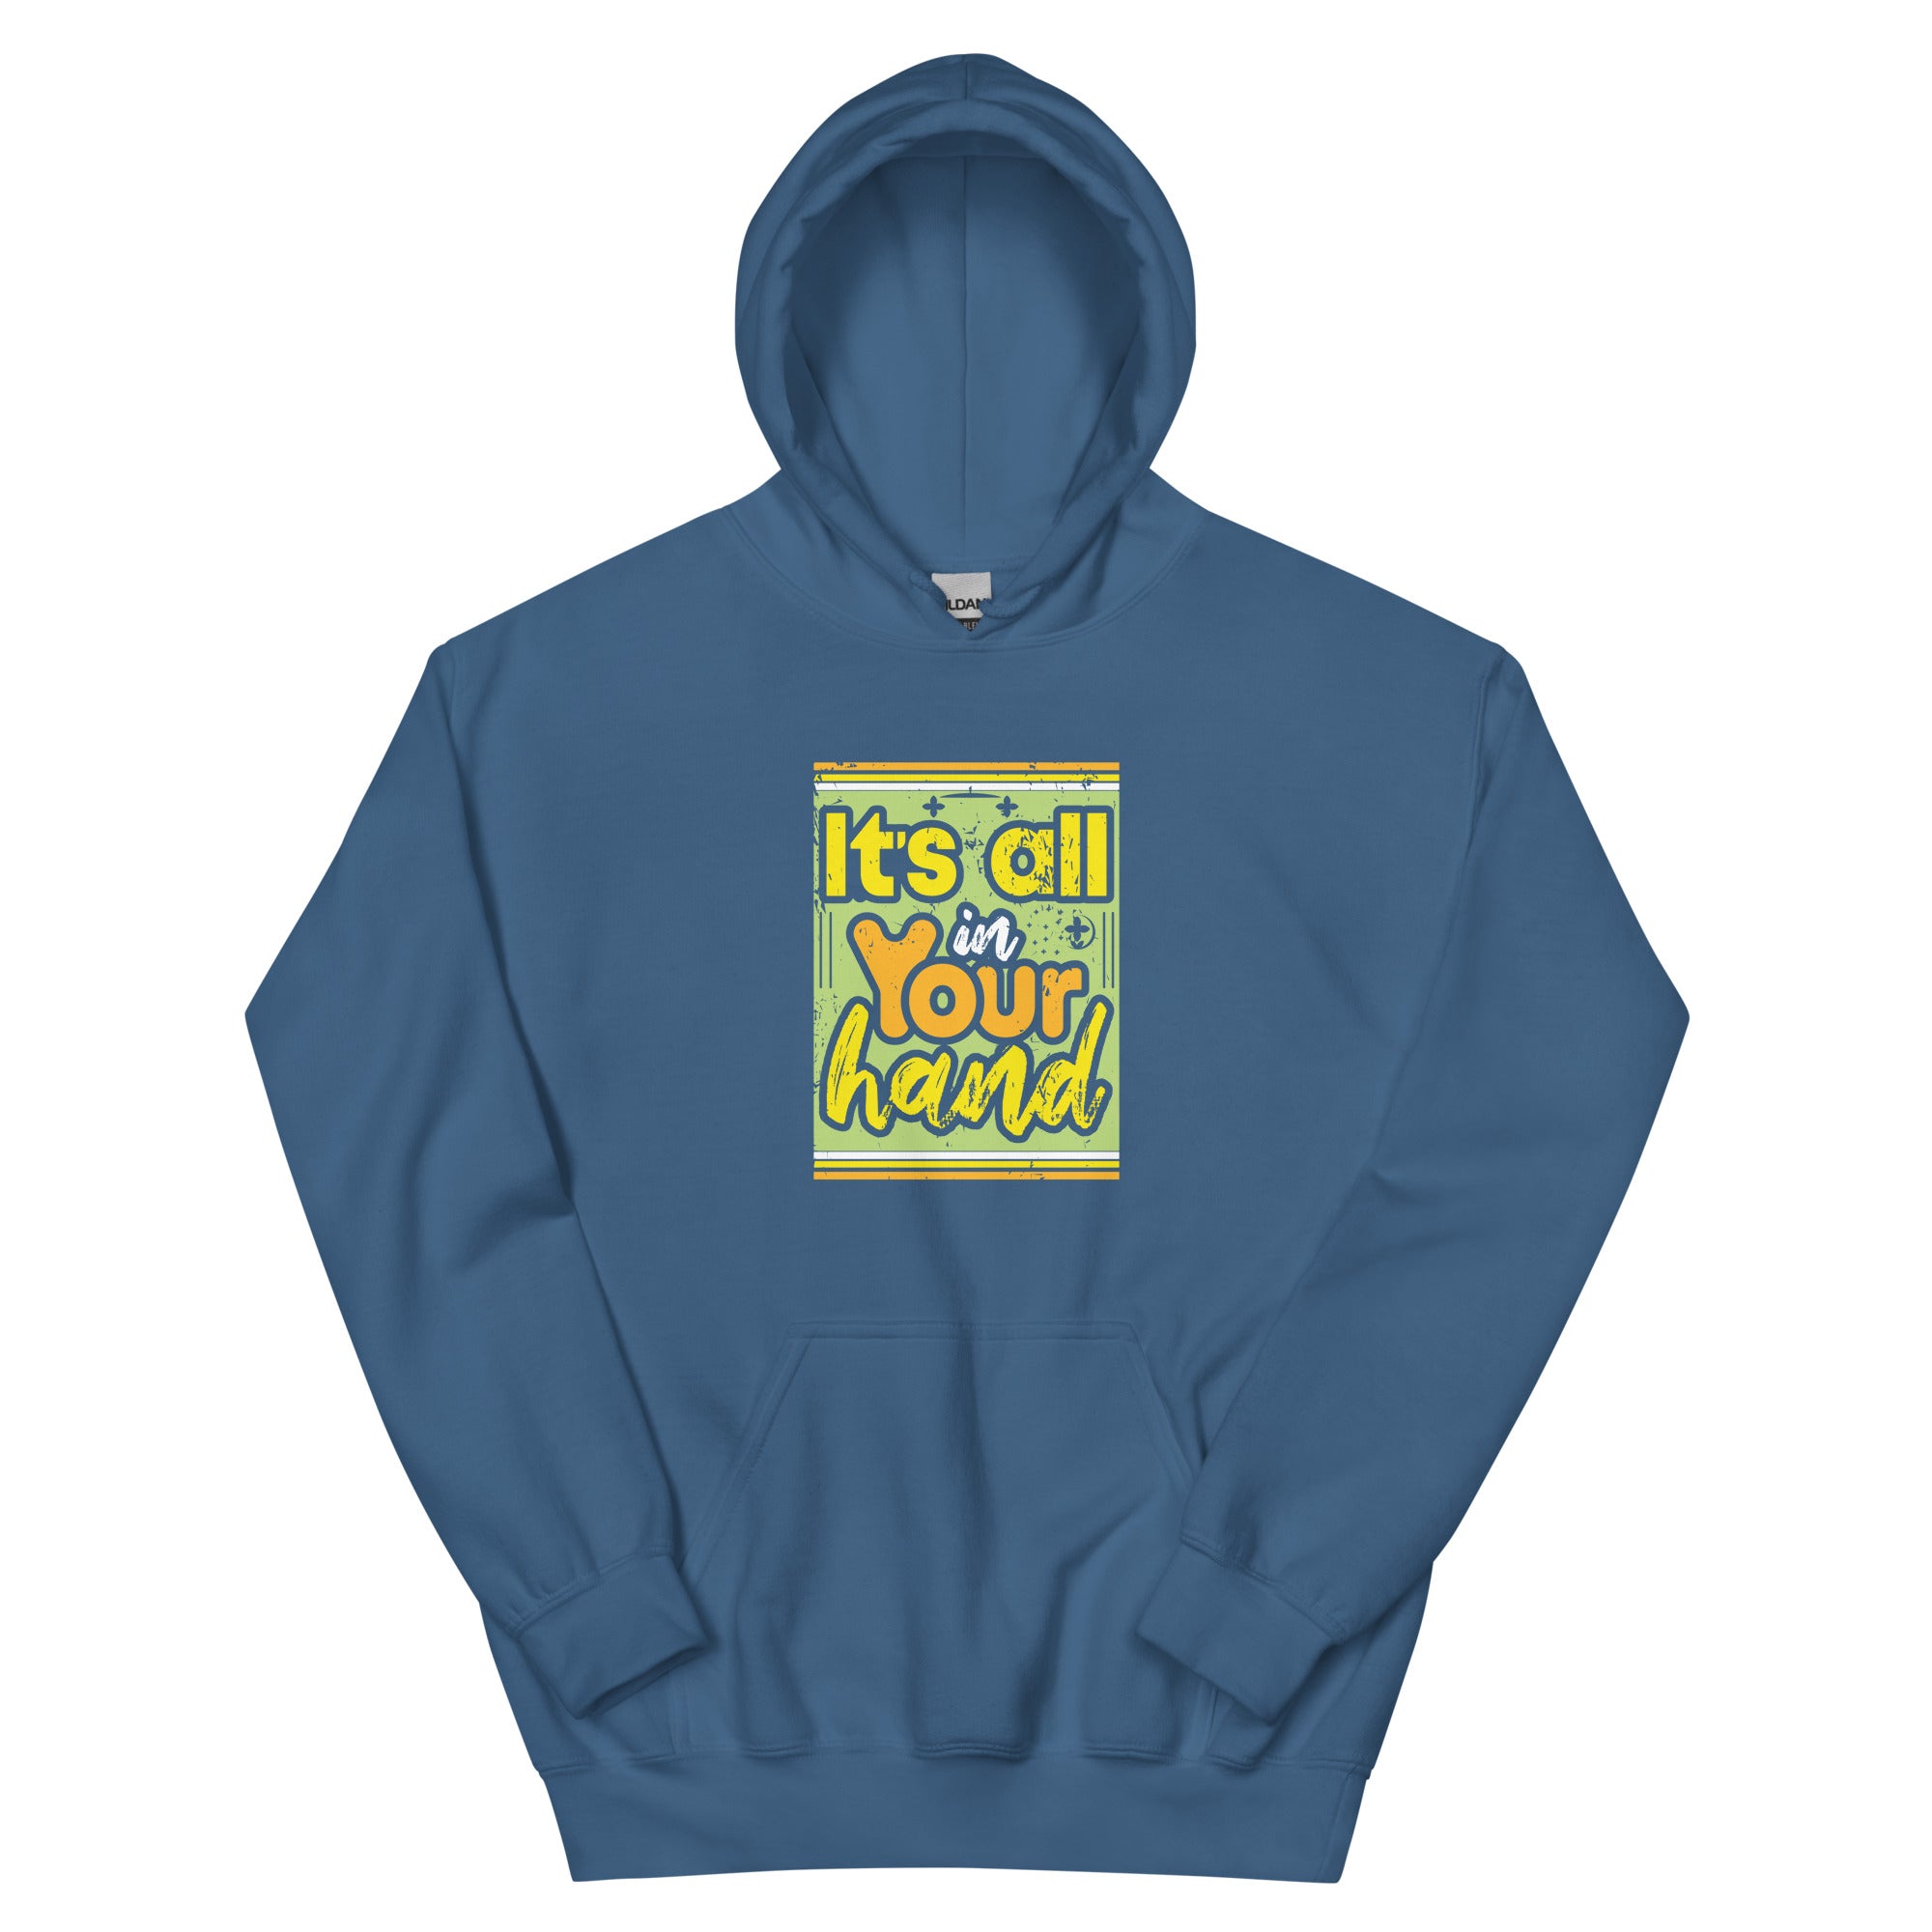 It's All in Your Hand - Unisex Hoodie